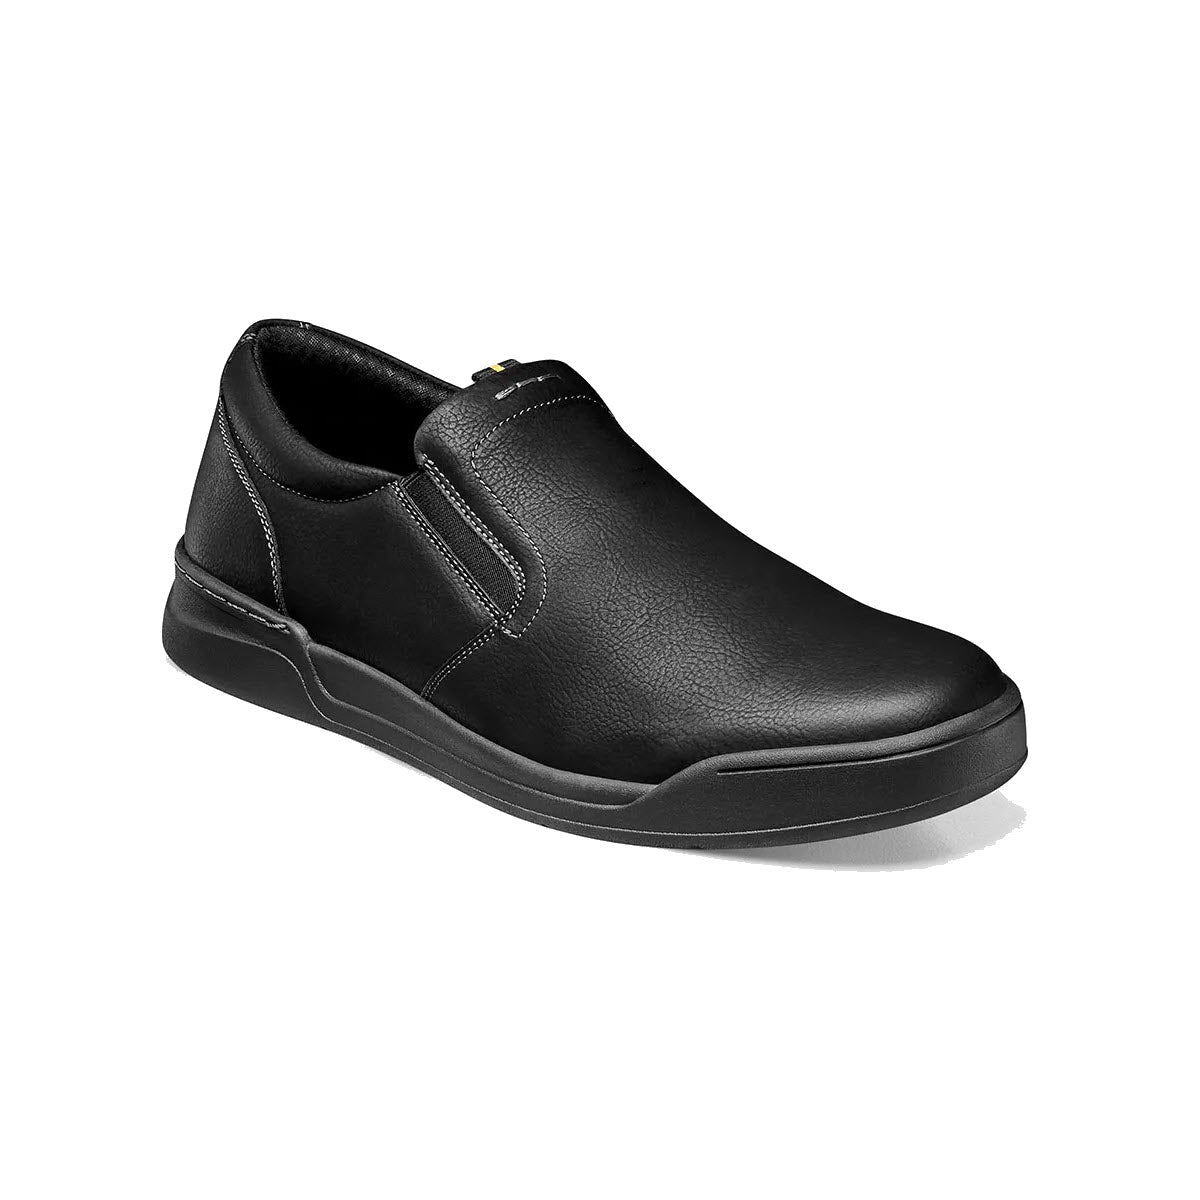 Black Nunn Bush Tour Work plain toe slip-on casual shoe with a low profile sole and a molded footbed.